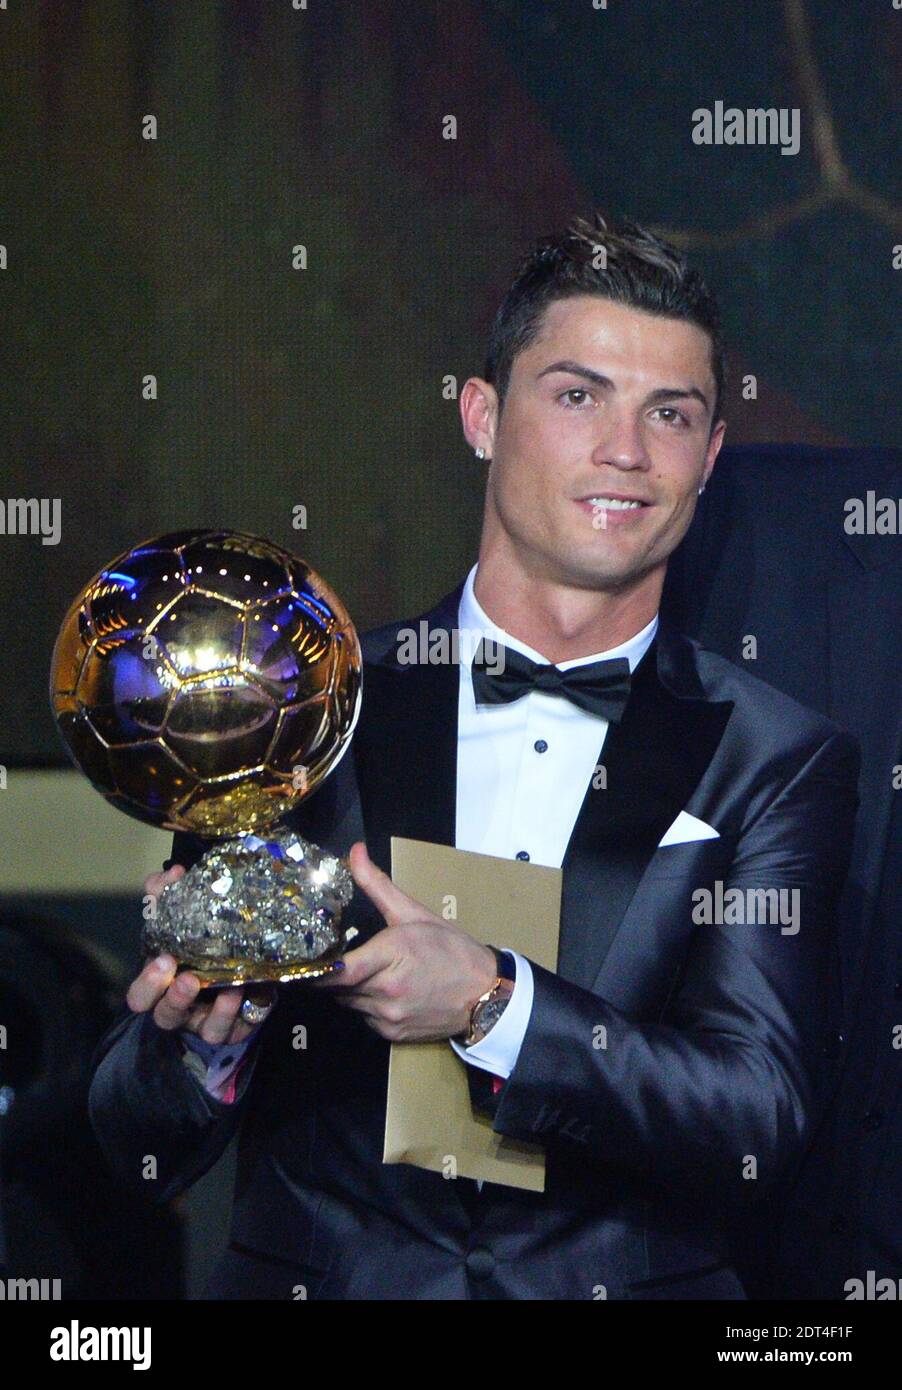 Portugal's Cristiano Ronaldo with son Cristiano Junior receiving the FIFA  Ballon d'Or award from Sepp Blatter, Francois Moriniere and Peleduring FIFA  Ballon d'Or 2013 trophy at the Kongresshalle in Zurich, Switzerland on